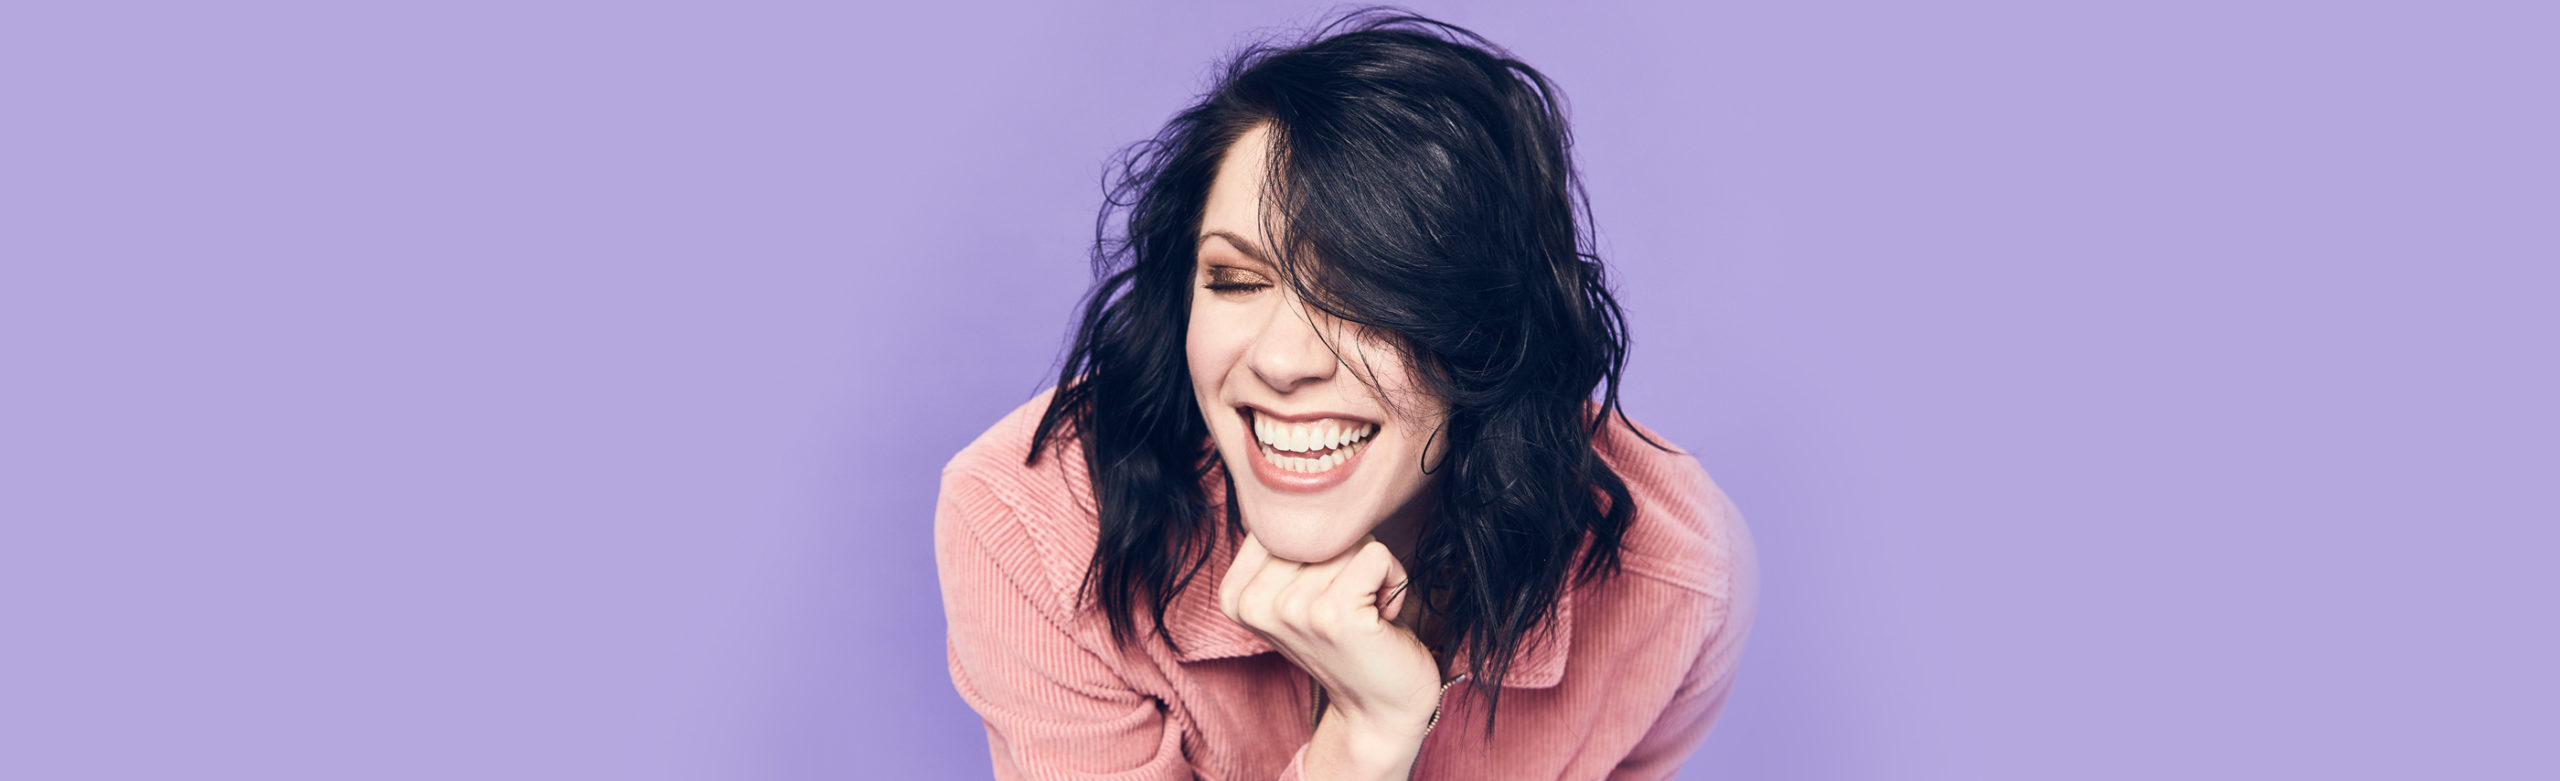 Grammy Nominated Artist K.Flay Announces Tour Stop in Missoula and Drops New Single Image